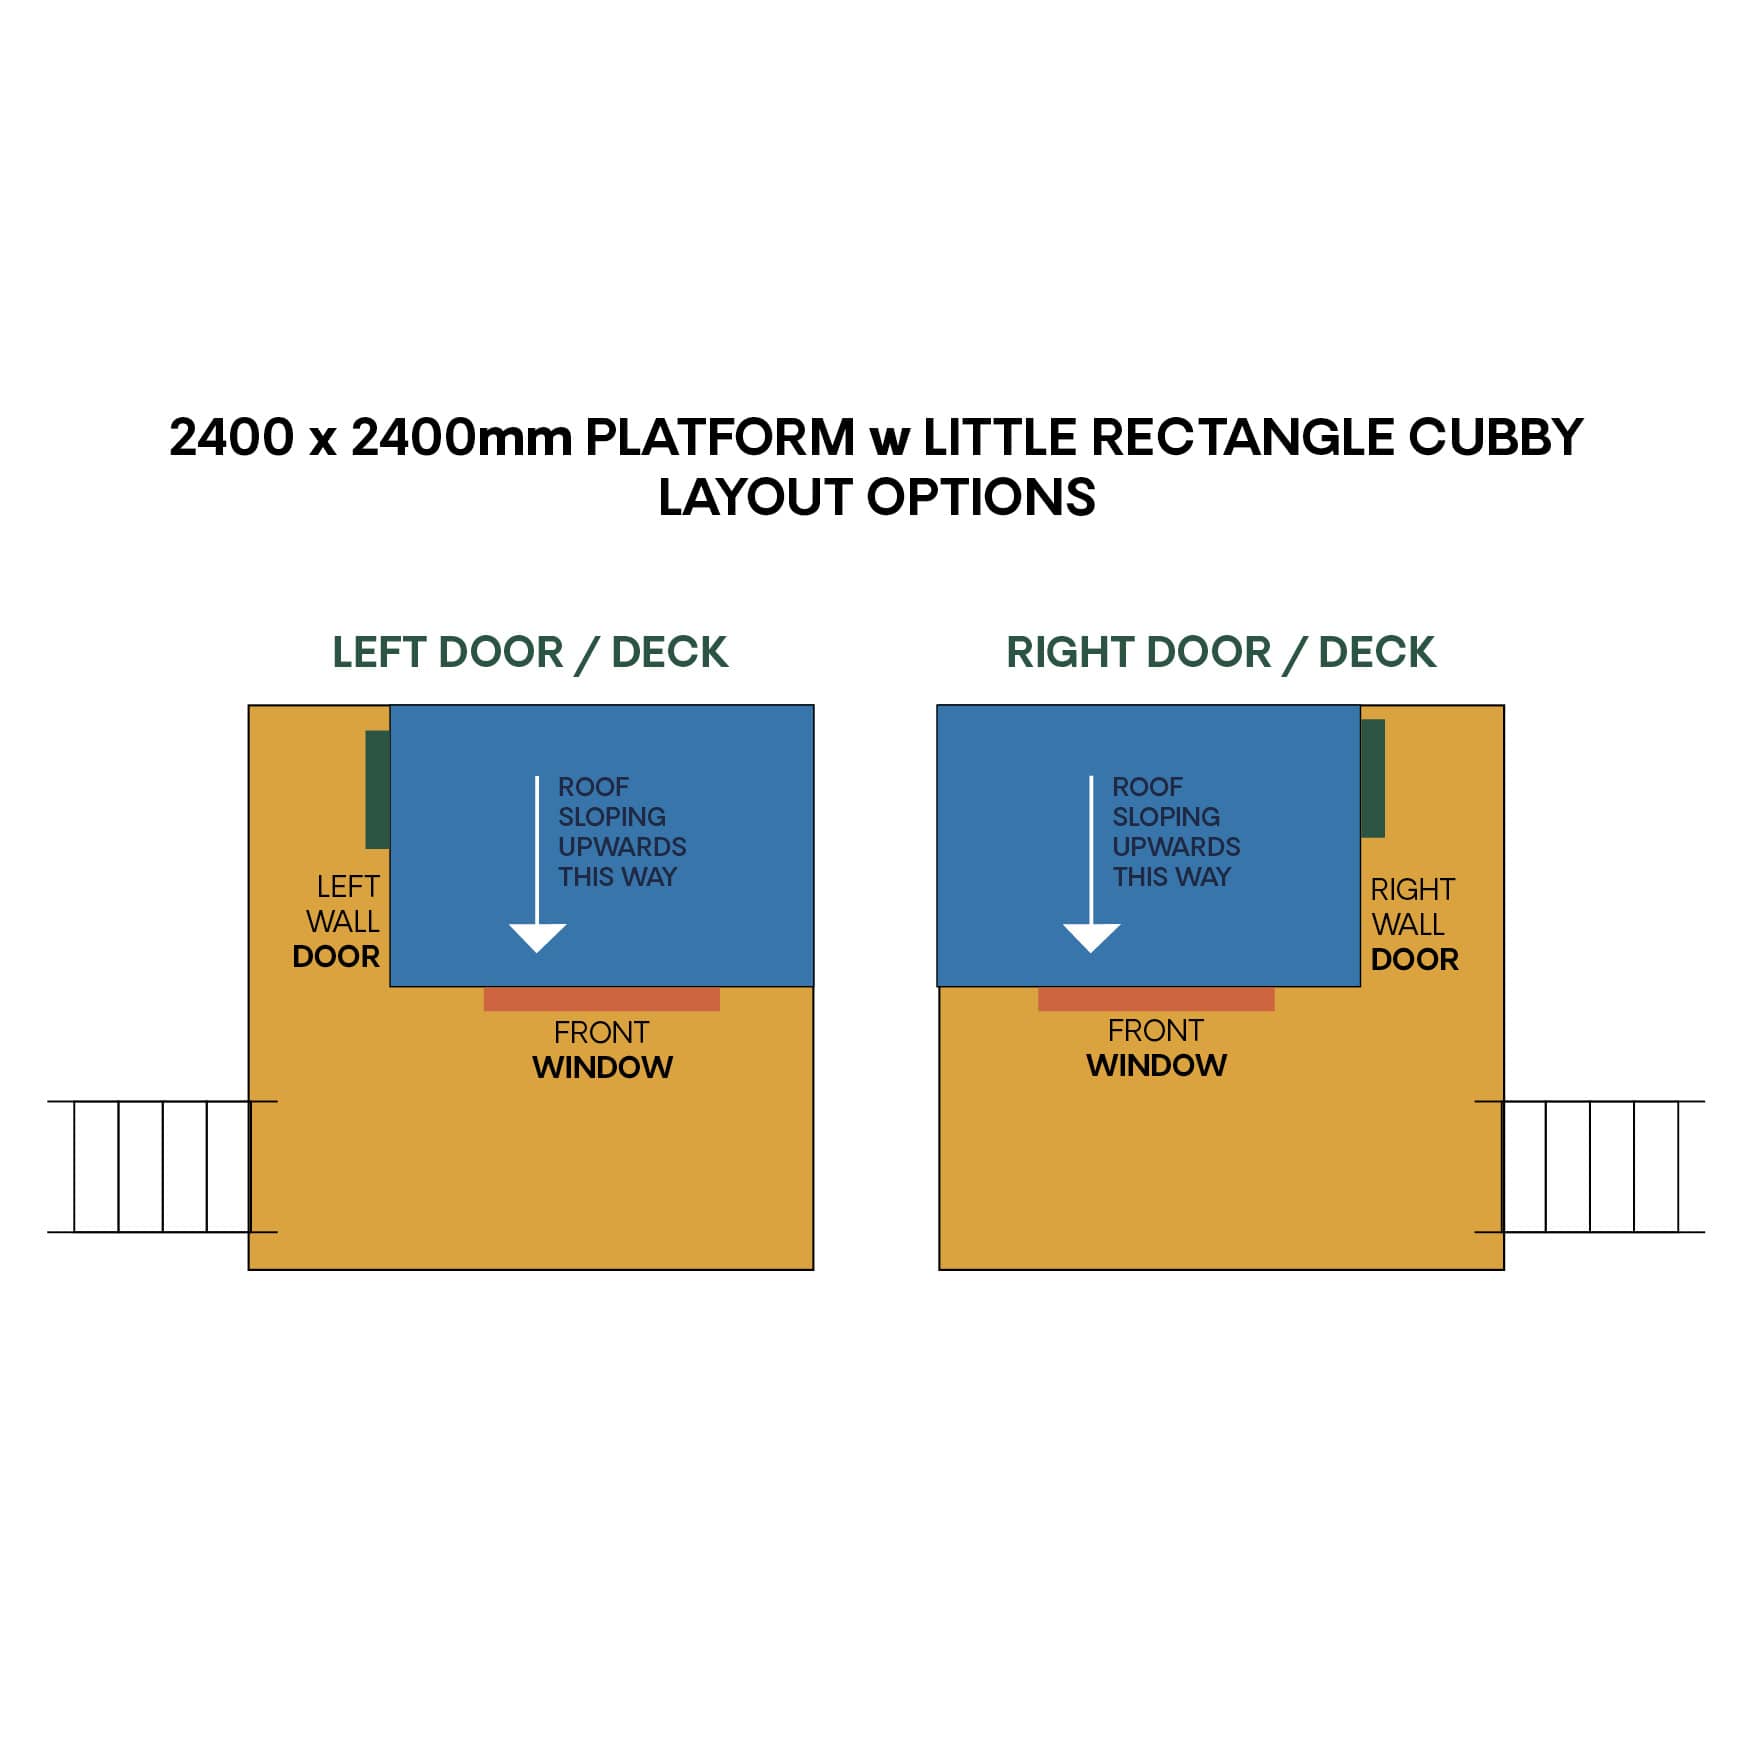 Layout diagram for 2400x2400 raised cubby